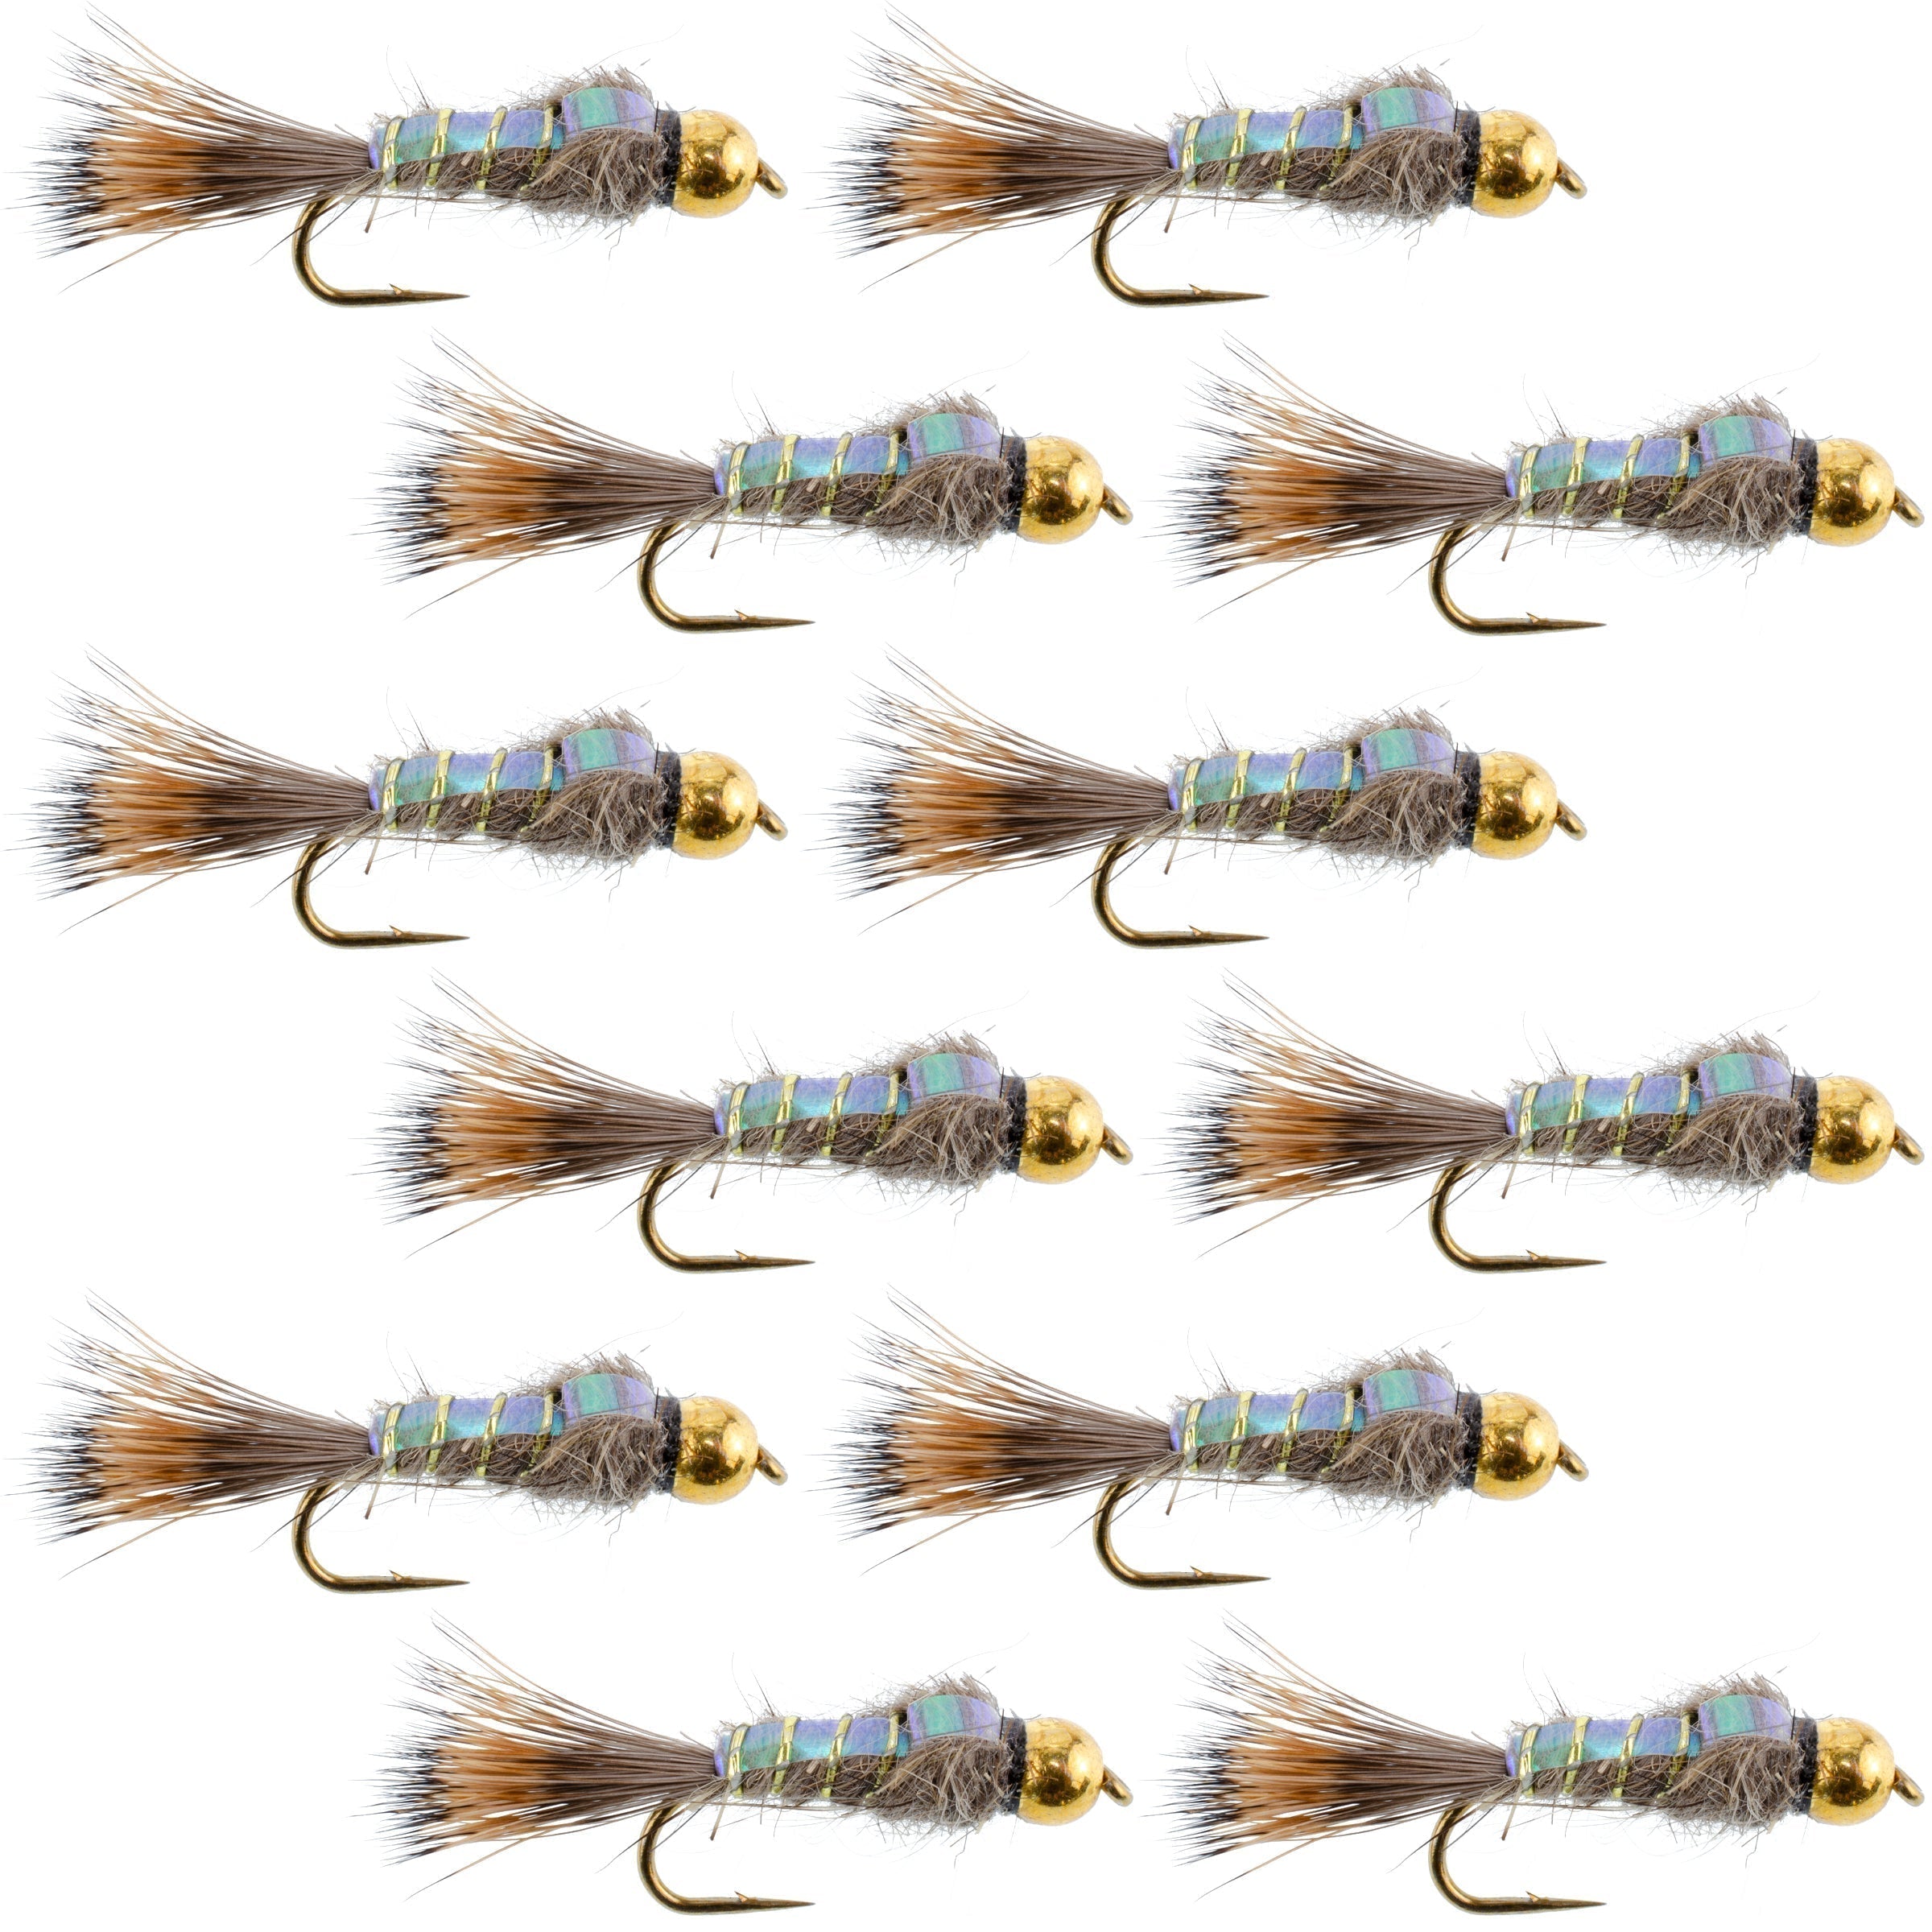 Tungsten Bead Flashback Gold Ribbed Hare's Ear Trout Fly 1 Dozen Nymph Wet Flies Size 18